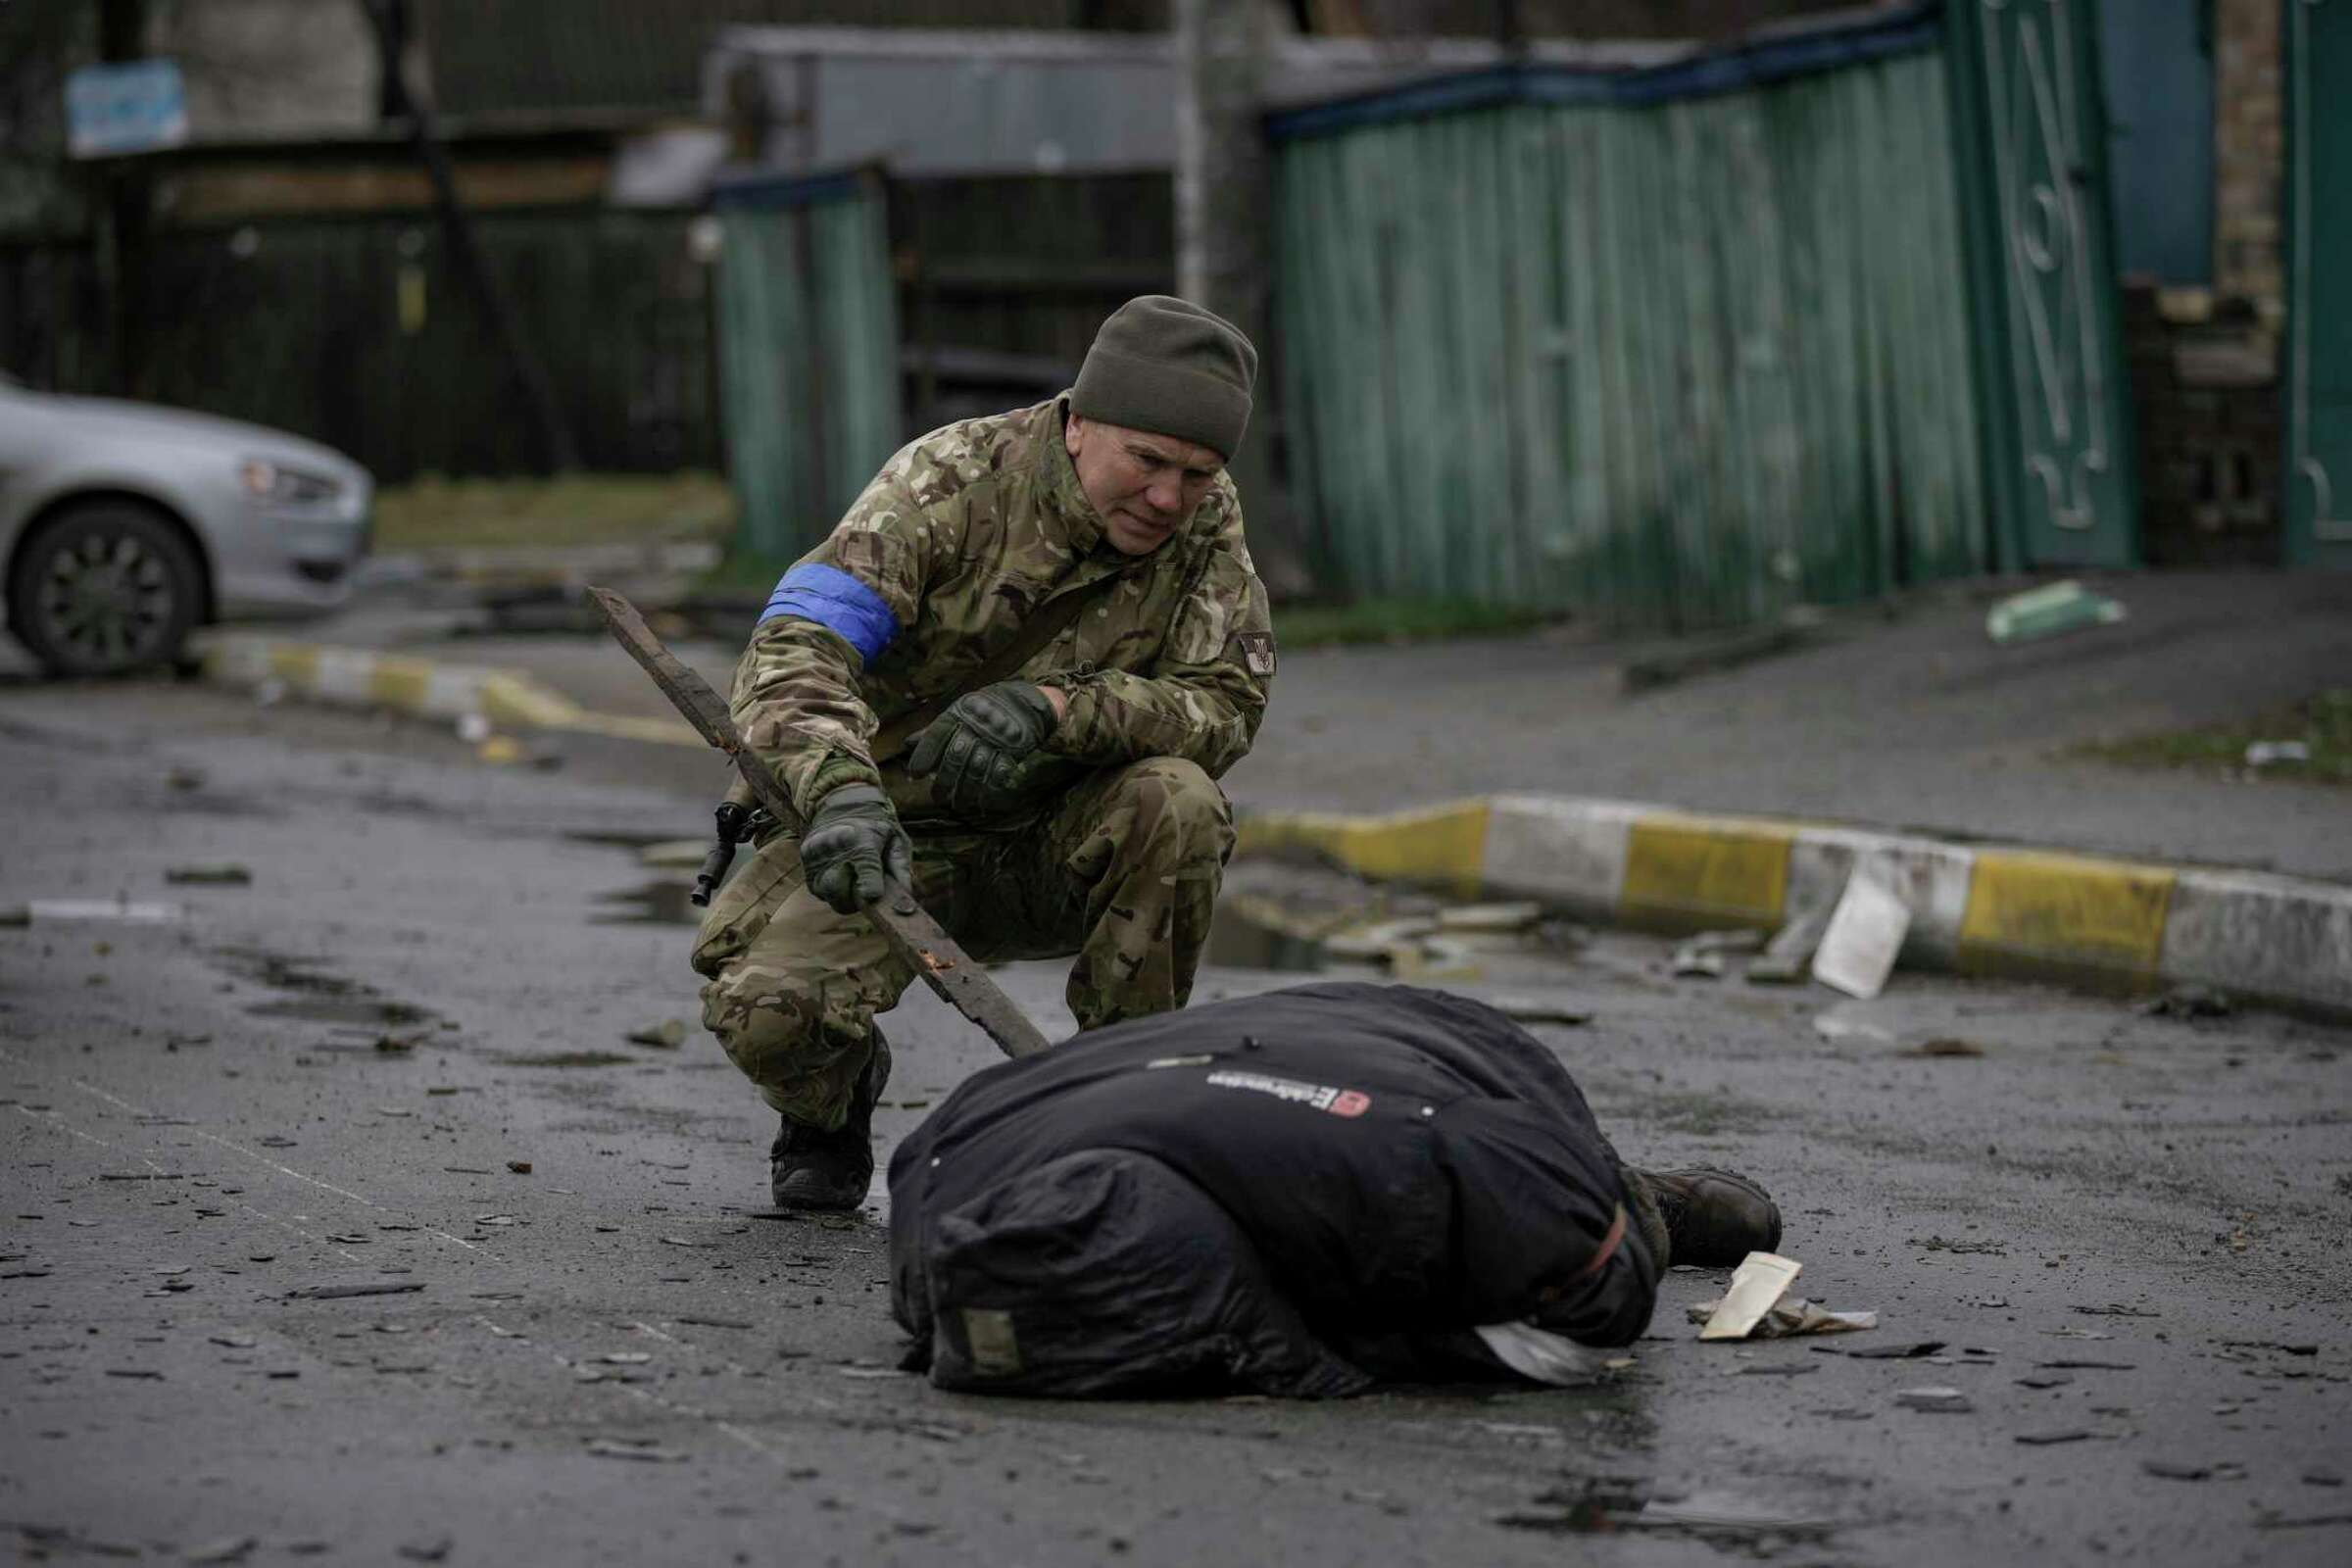 A Ukrainian serviceman uses a piece of wood to check if the body of a man dressed in civilian clothing is booby-trapped with explosive devices, in the formerly Russian-occupied Kyiv suburb of Bucha, Ukraine, on Saturday, 2 April 2022. As Russian forces pulled back from Ukraine's capital region, retreating troops created a "catastrophic" situation for civilians by leaving mines around homes, abandoned equipment and "even the bodies of those killed," Ukraine President Volodymyr Zelenskyy warned on Saturday. Photo: Vadim Ghirda / AP